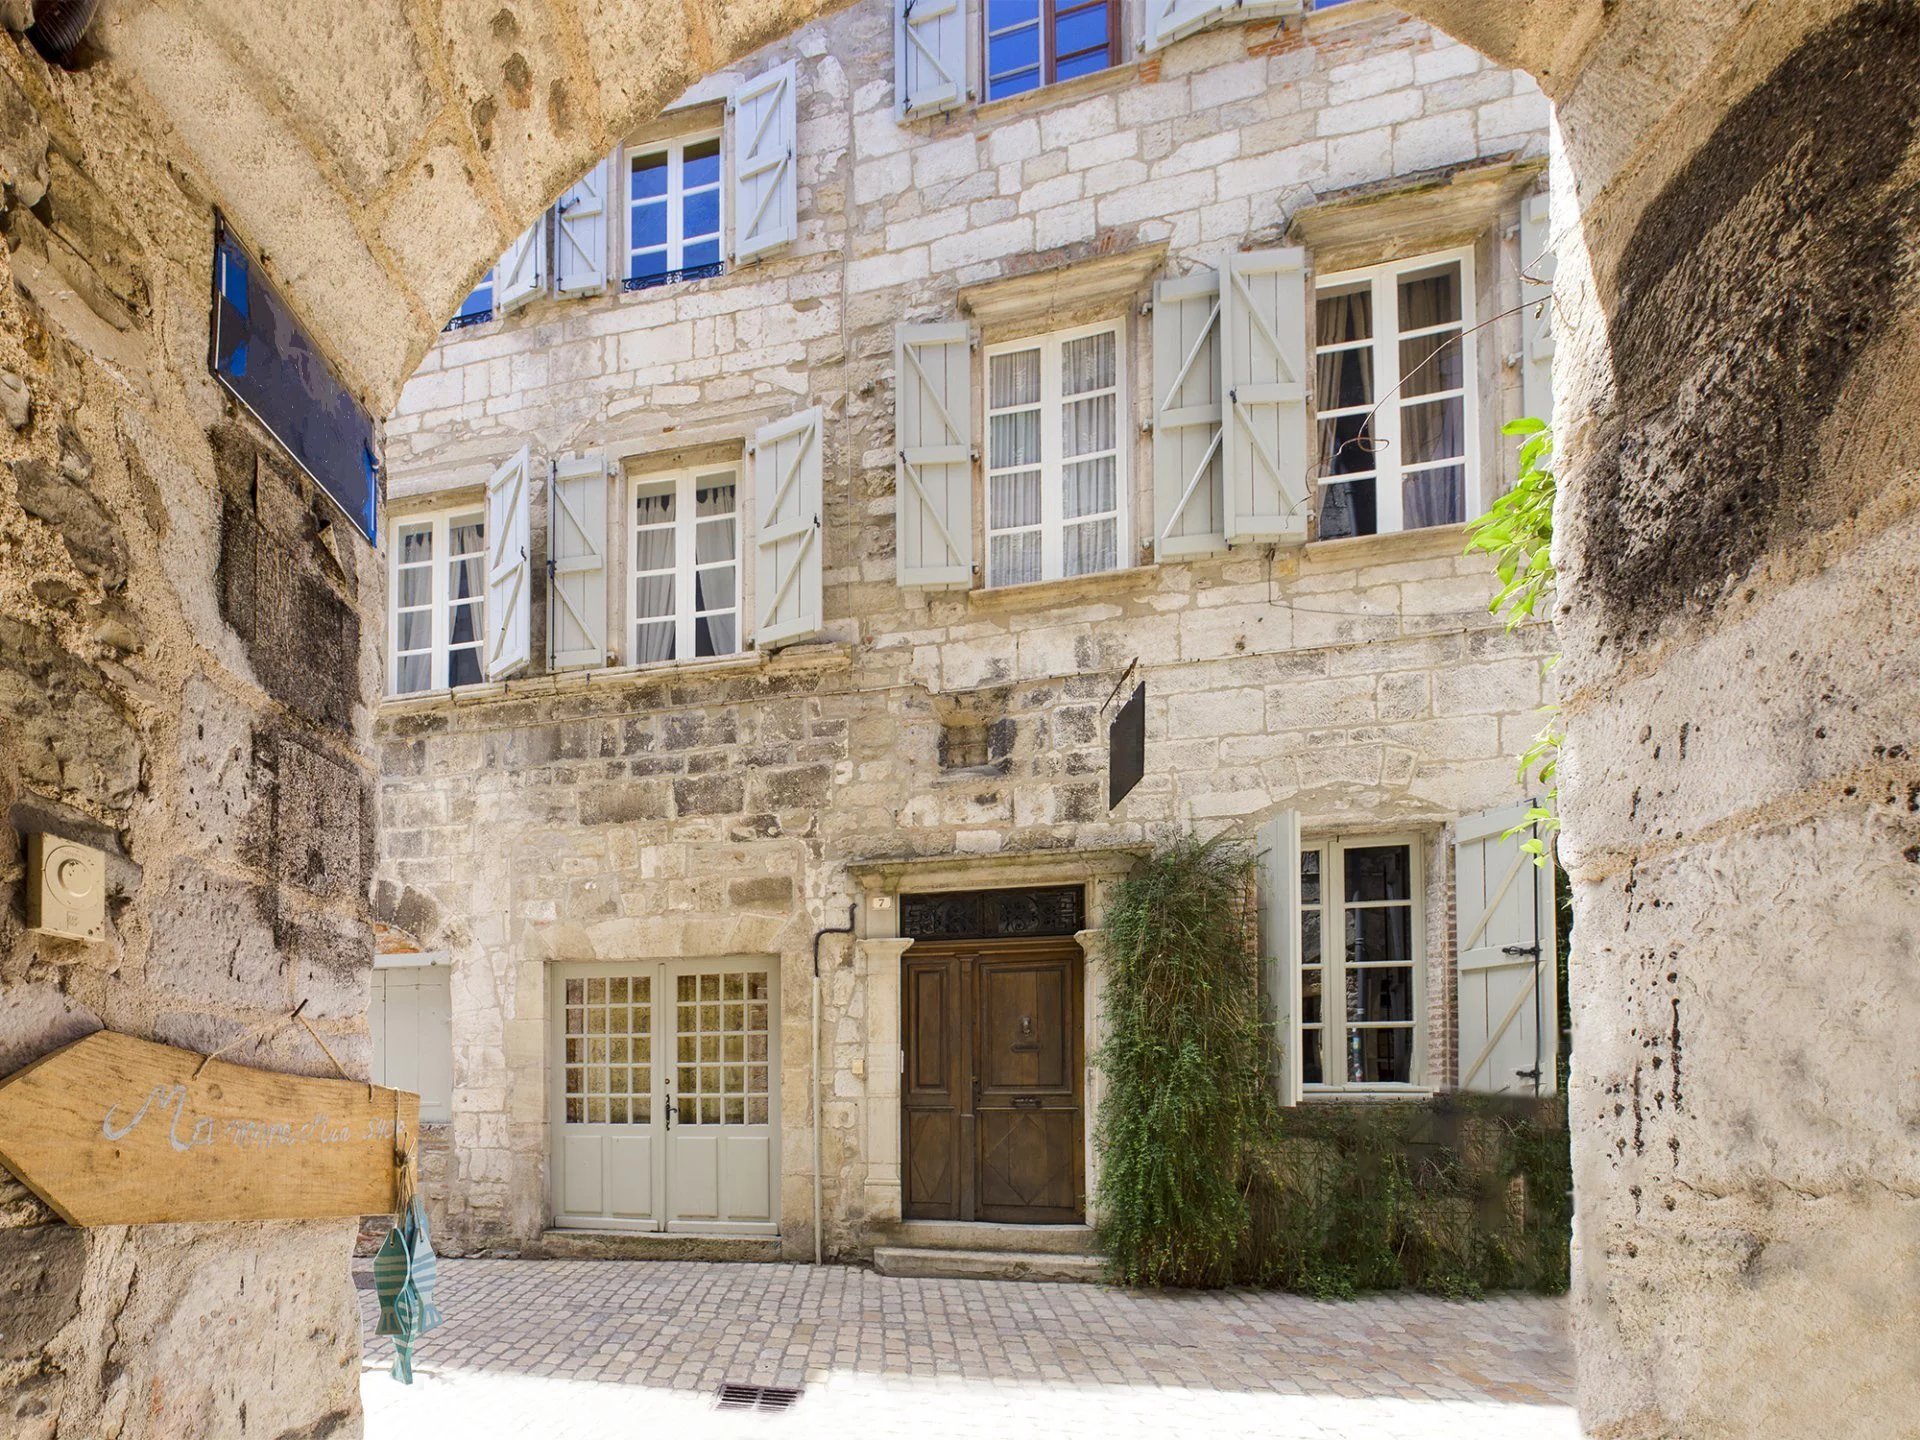 13th century grand house at the heart of St Antonin Noble Val